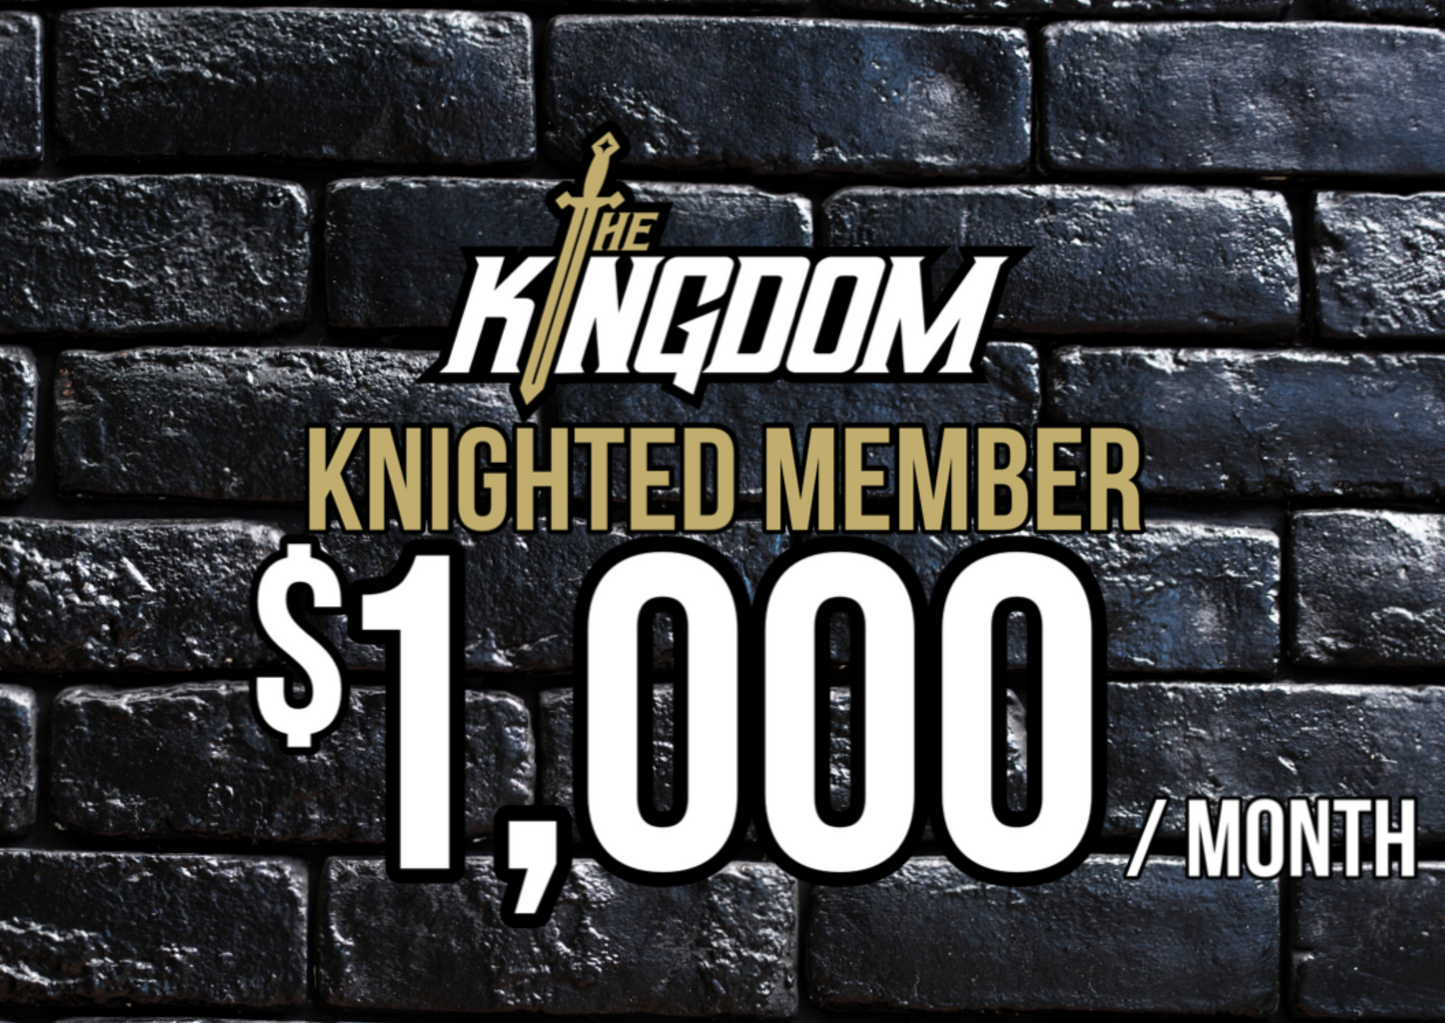 Kingdom Knighted Member: $1,000 per Month